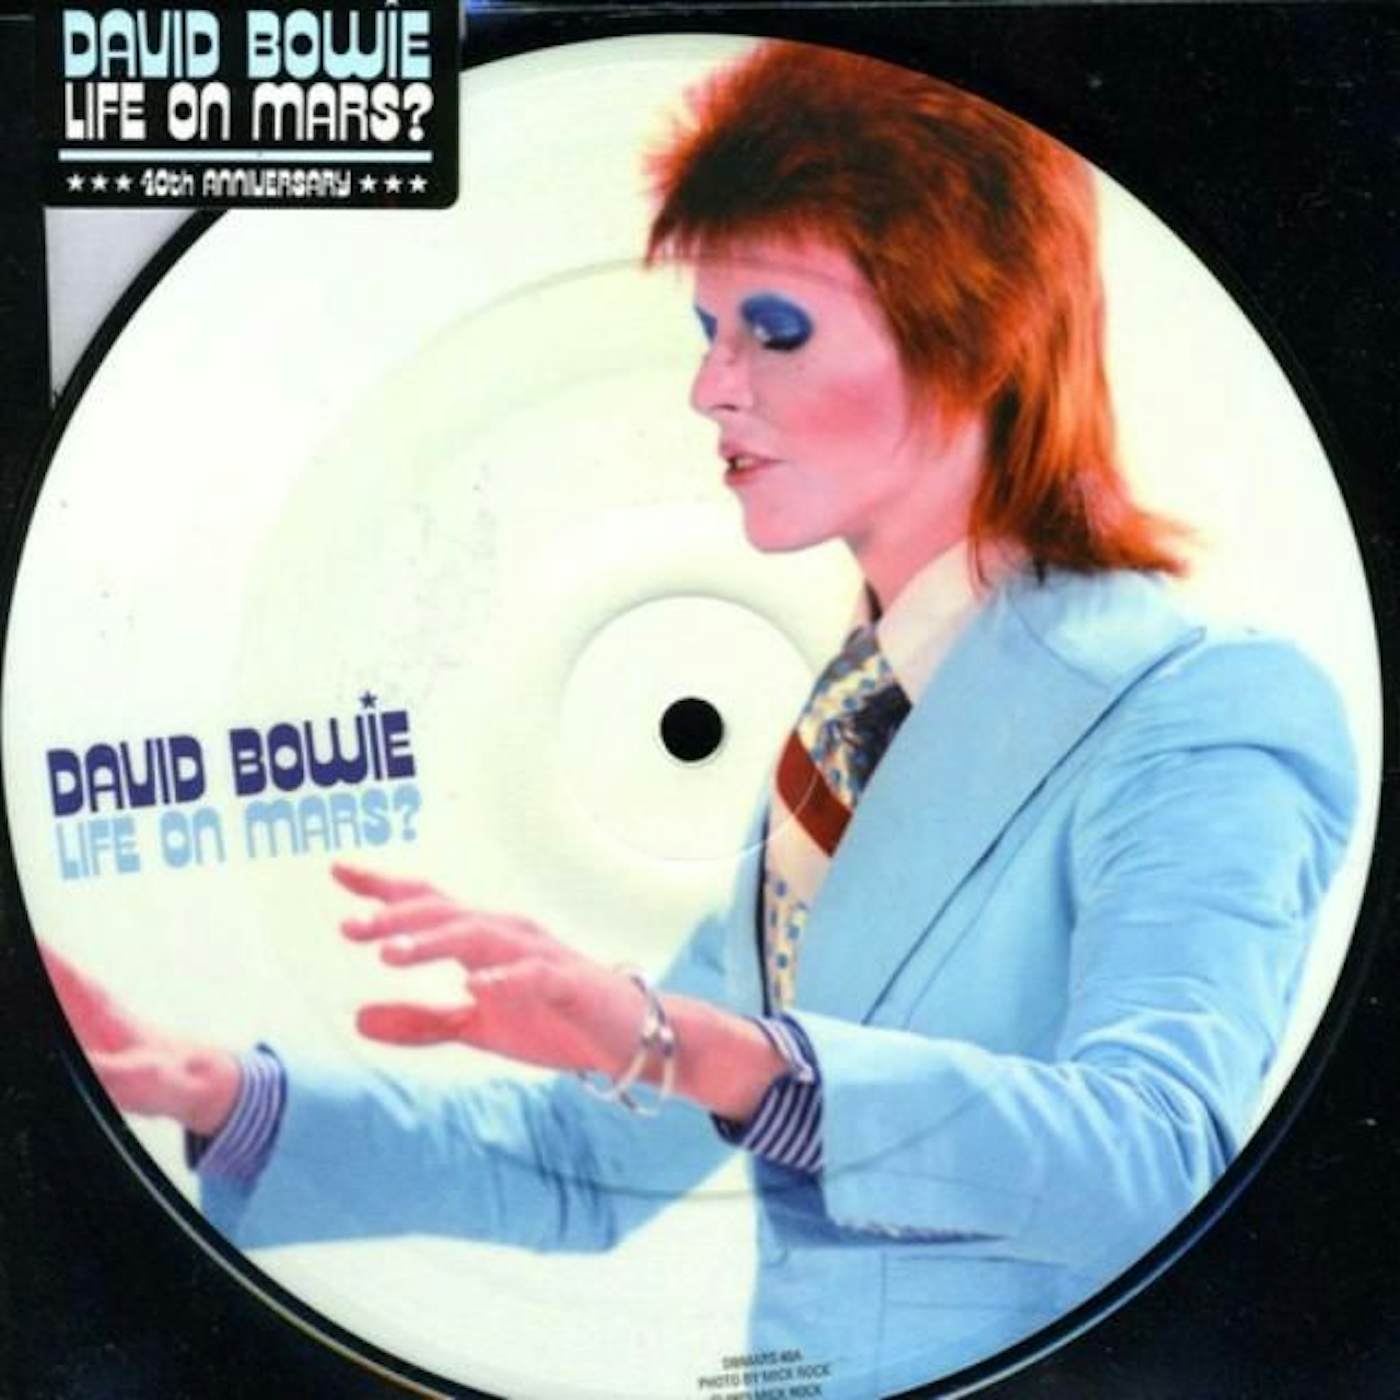 David Bowie LIFE ON MARS (40TH ANNIVERSARY PICTURE DISC) (Vinyl)